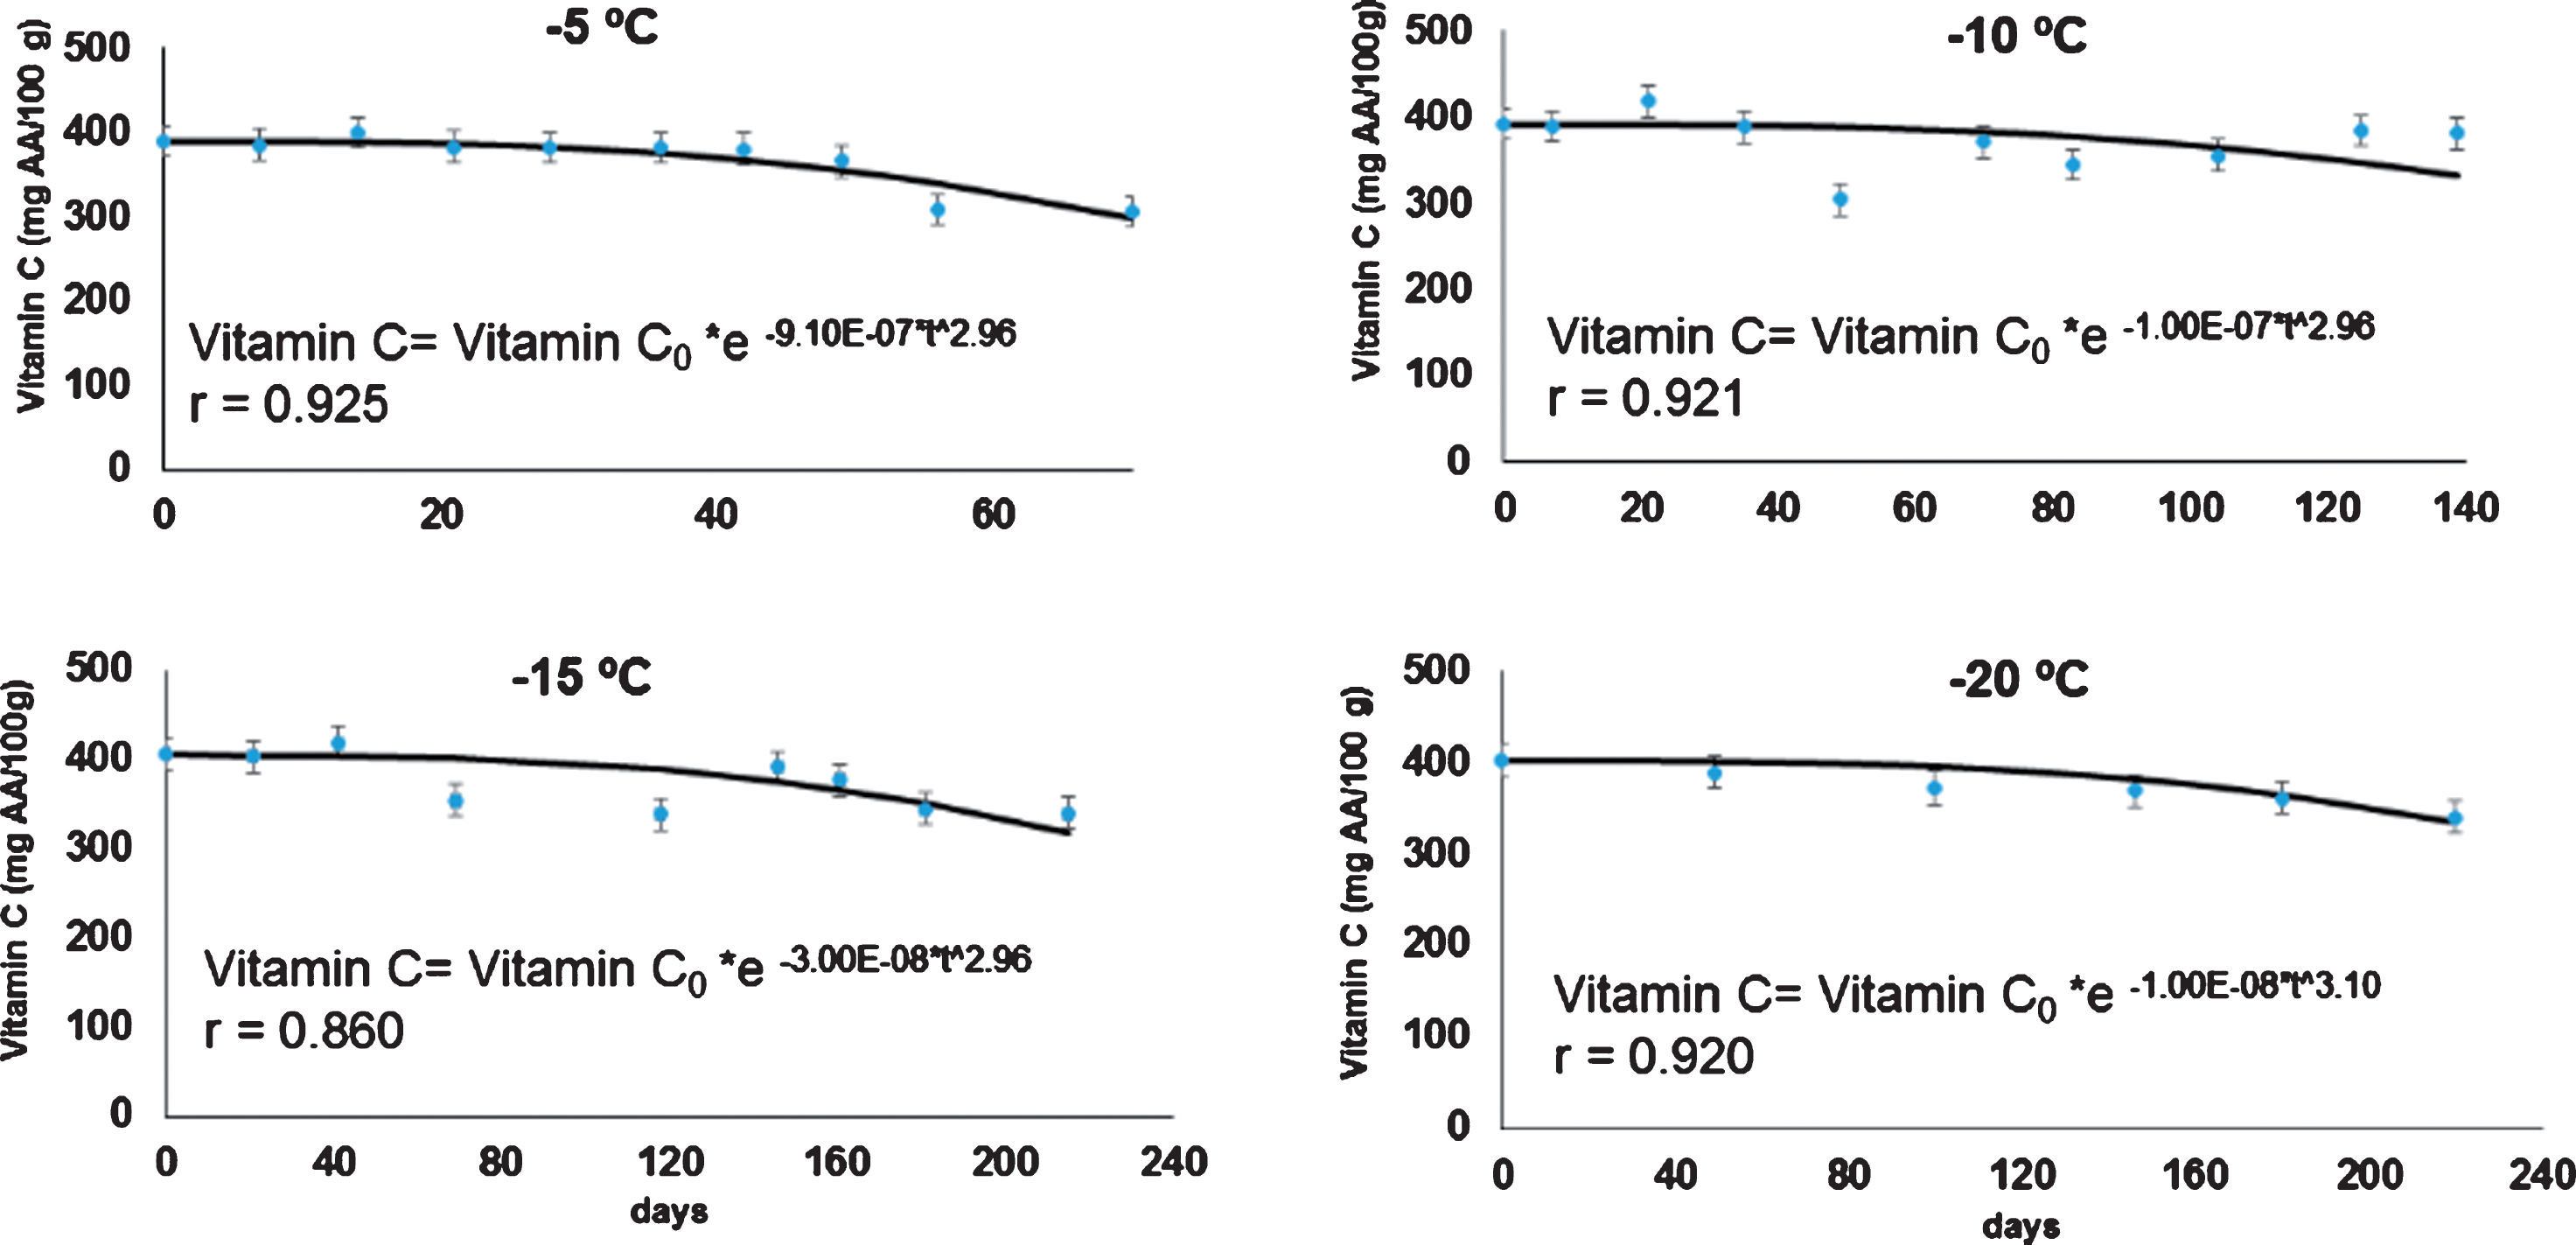 Kinetics of the vitamin C content in rose hip pulp, fit to the Weibull model at 4 frozen storage temperatures.